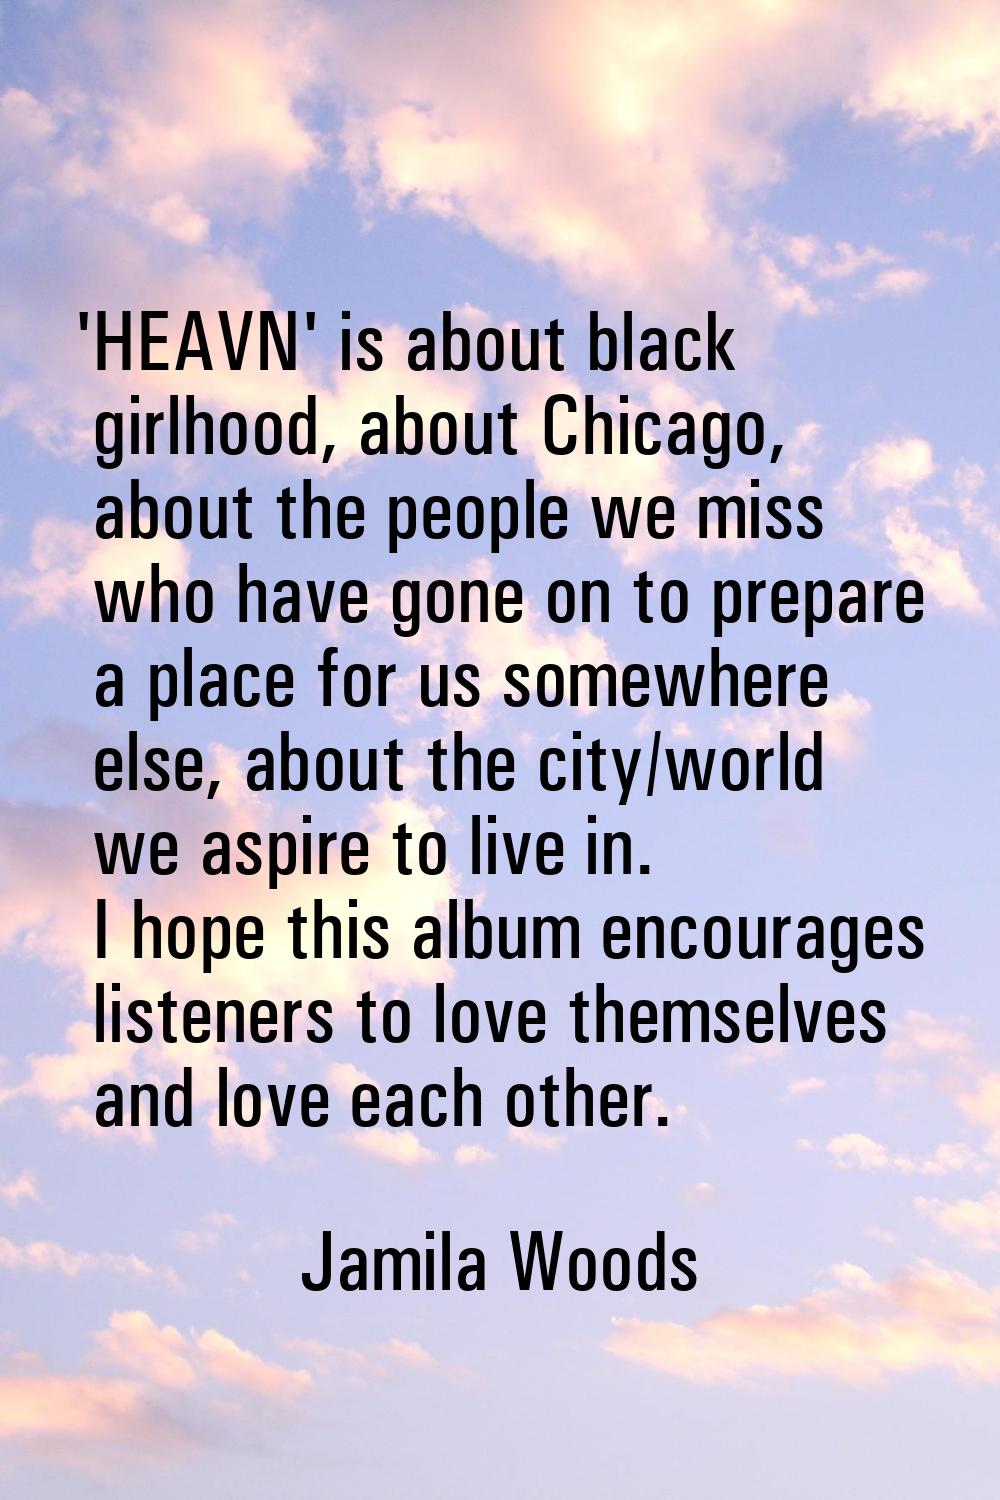 'HEAVN' is about black girlhood, about Chicago, about the people we miss who have gone on to prepar